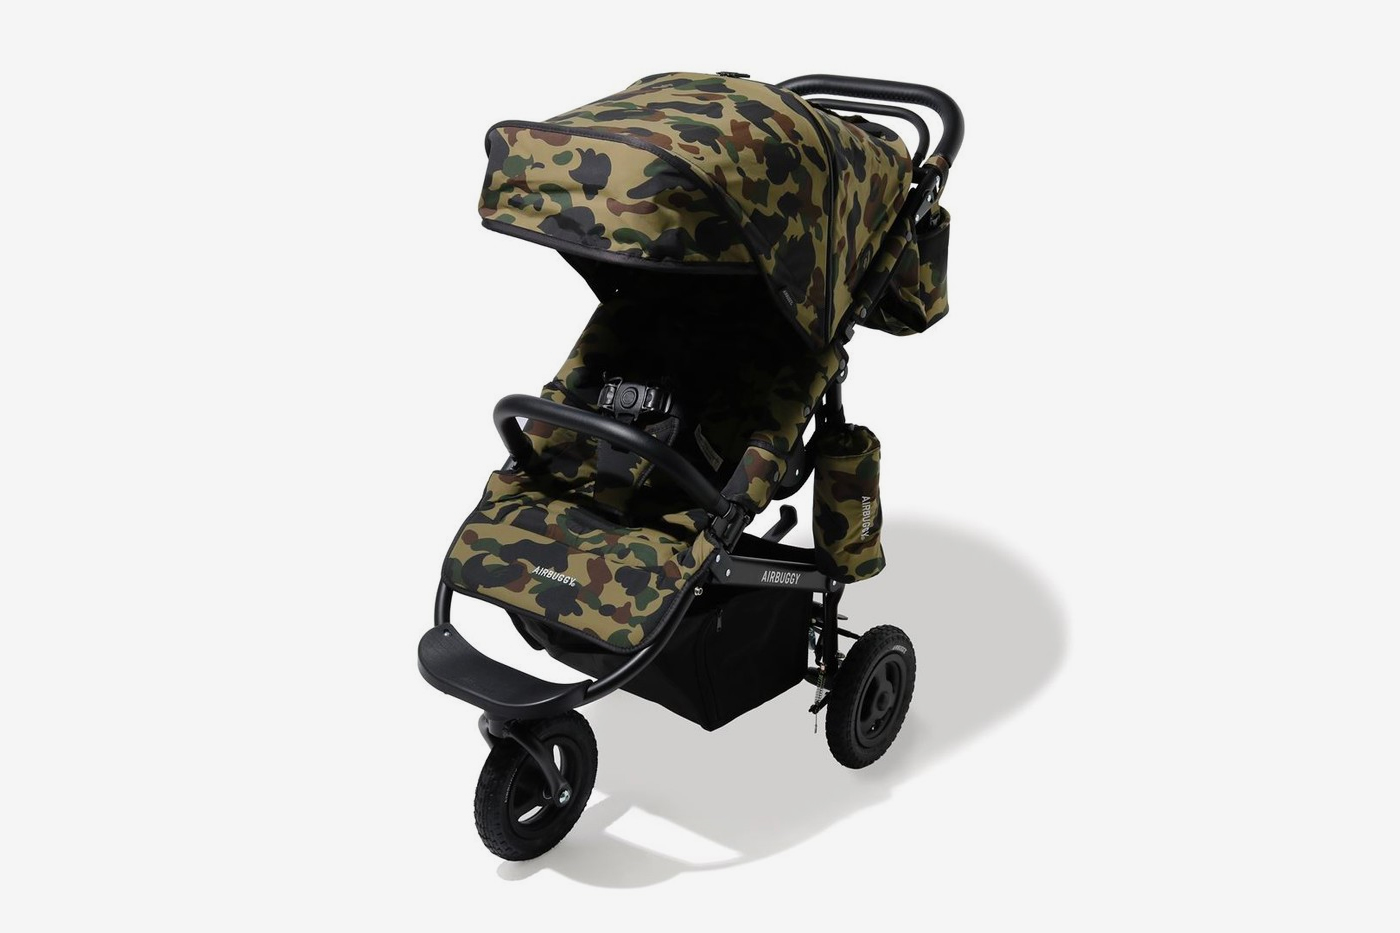 BAPE 1ST CAMO AIRBUGGY Stroller Release 